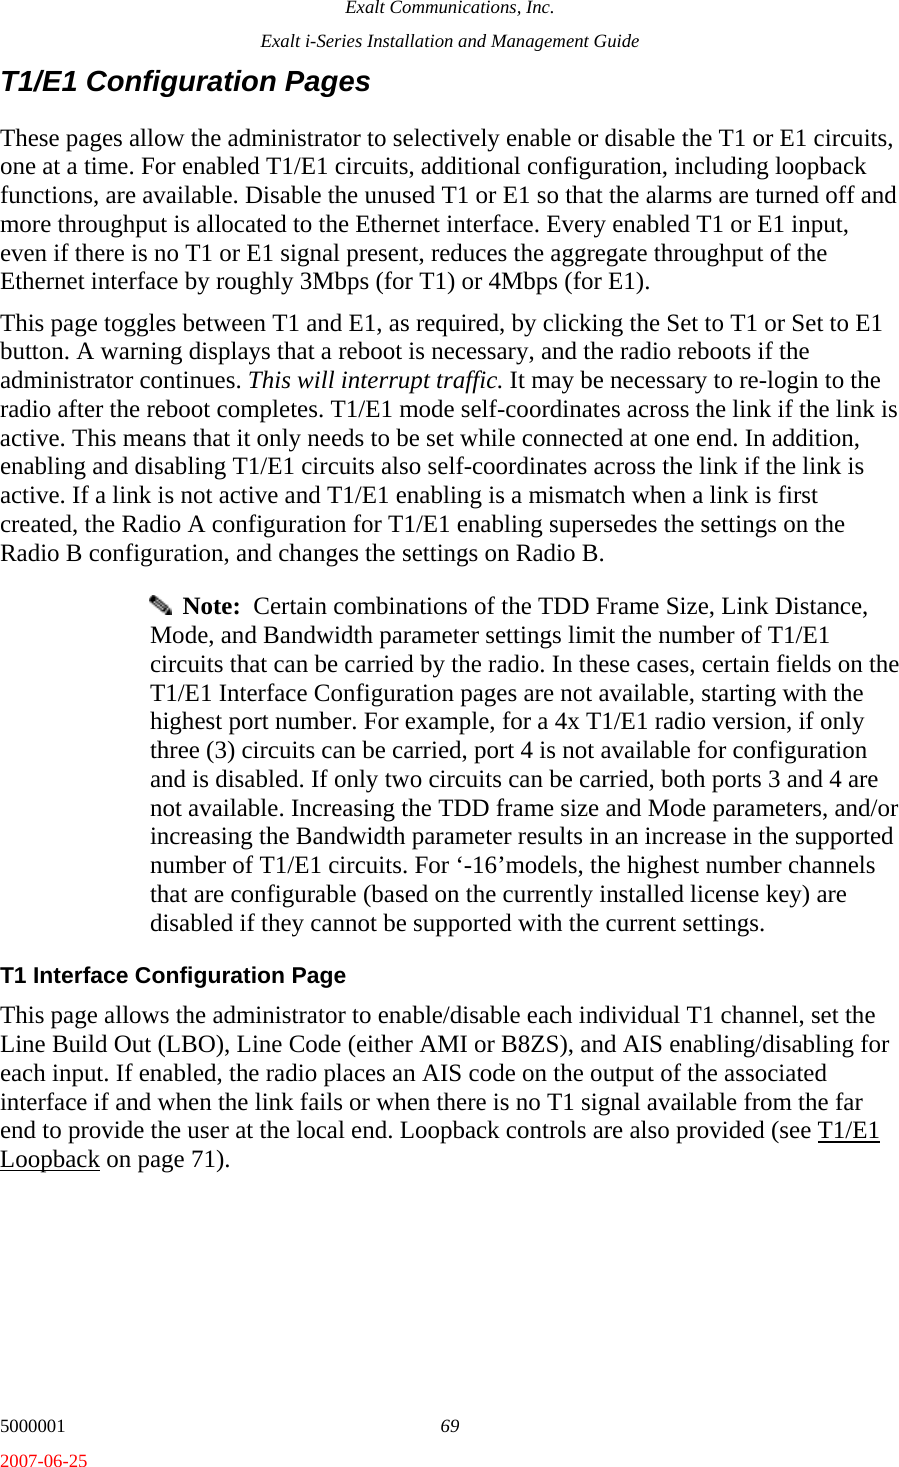 Exalt Communications, Inc. Exalt i-Series Installation and Management Guide 5000001  69 2007-06-25 T1/E1 Configuration Pages These pages allow the administrator to selectively enable or disable the T1 or E1 circuits, one at a time. For enabled T1/E1 circuits, additional configuration, including loopback functions, are available. Disable the unused T1 or E1 so that the alarms are turned off and more throughput is allocated to the Ethernet interface. Every enabled T1 or E1 input, even if there is no T1 or E1 signal present, reduces the aggregate throughput of the Ethernet interface by roughly 3Mbps (for T1) or 4Mbps (for E1). This page toggles between T1 and E1, as required, by clicking the Set to T1 or Set to E1 button. A warning displays that a reboot is necessary, and the radio reboots if the administrator continues. This will interrupt traffic. It may be necessary to re-login to the radio after the reboot completes. T1/E1 mode self-coordinates across the link if the link is active. This means that it only needs to be set while connected at one end. In addition, enabling and disabling T1/E1 circuits also self-coordinates across the link if the link is active. If a link is not active and T1/E1 enabling is a mismatch when a link is first created, the Radio A configuration for T1/E1 enabling supersedes the settings on the Radio B configuration, and changes the settings on Radio B.   Note:  Certain combinations of the TDD Frame Size, Link Distance, Mode, and Bandwidth parameter settings limit the number of T1/E1 circuits that can be carried by the radio. In these cases, certain fields on the T1/E1 Interface Configuration pages are not available, starting with the highest port number. For example, for a 4x T1/E1 radio version, if only three (3) circuits can be carried, port 4 is not available for configuration and is disabled. If only two circuits can be carried, both ports 3 and 4 are not available. Increasing the TDD frame size and Mode parameters, and/or increasing the Bandwidth parameter results in an increase in the supported number of T1/E1 circuits. For ‘-16’models, the highest number channels that are configurable (based on the currently installed license key) are disabled if they cannot be supported with the current settings. T1 Interface Configuration Page This page allows the administrator to enable/disable each individual T1 channel, set the Line Build Out (LBO), Line Code (either AMI or B8ZS), and AIS enabling/disabling for each input. If enabled, the radio places an AIS code on the output of the associated interface if and when the link fails or when there is no T1 signal available from the far end to provide the user at the local end. Loopback controls are also provided (see T1/E1 Loopback on page 71). 